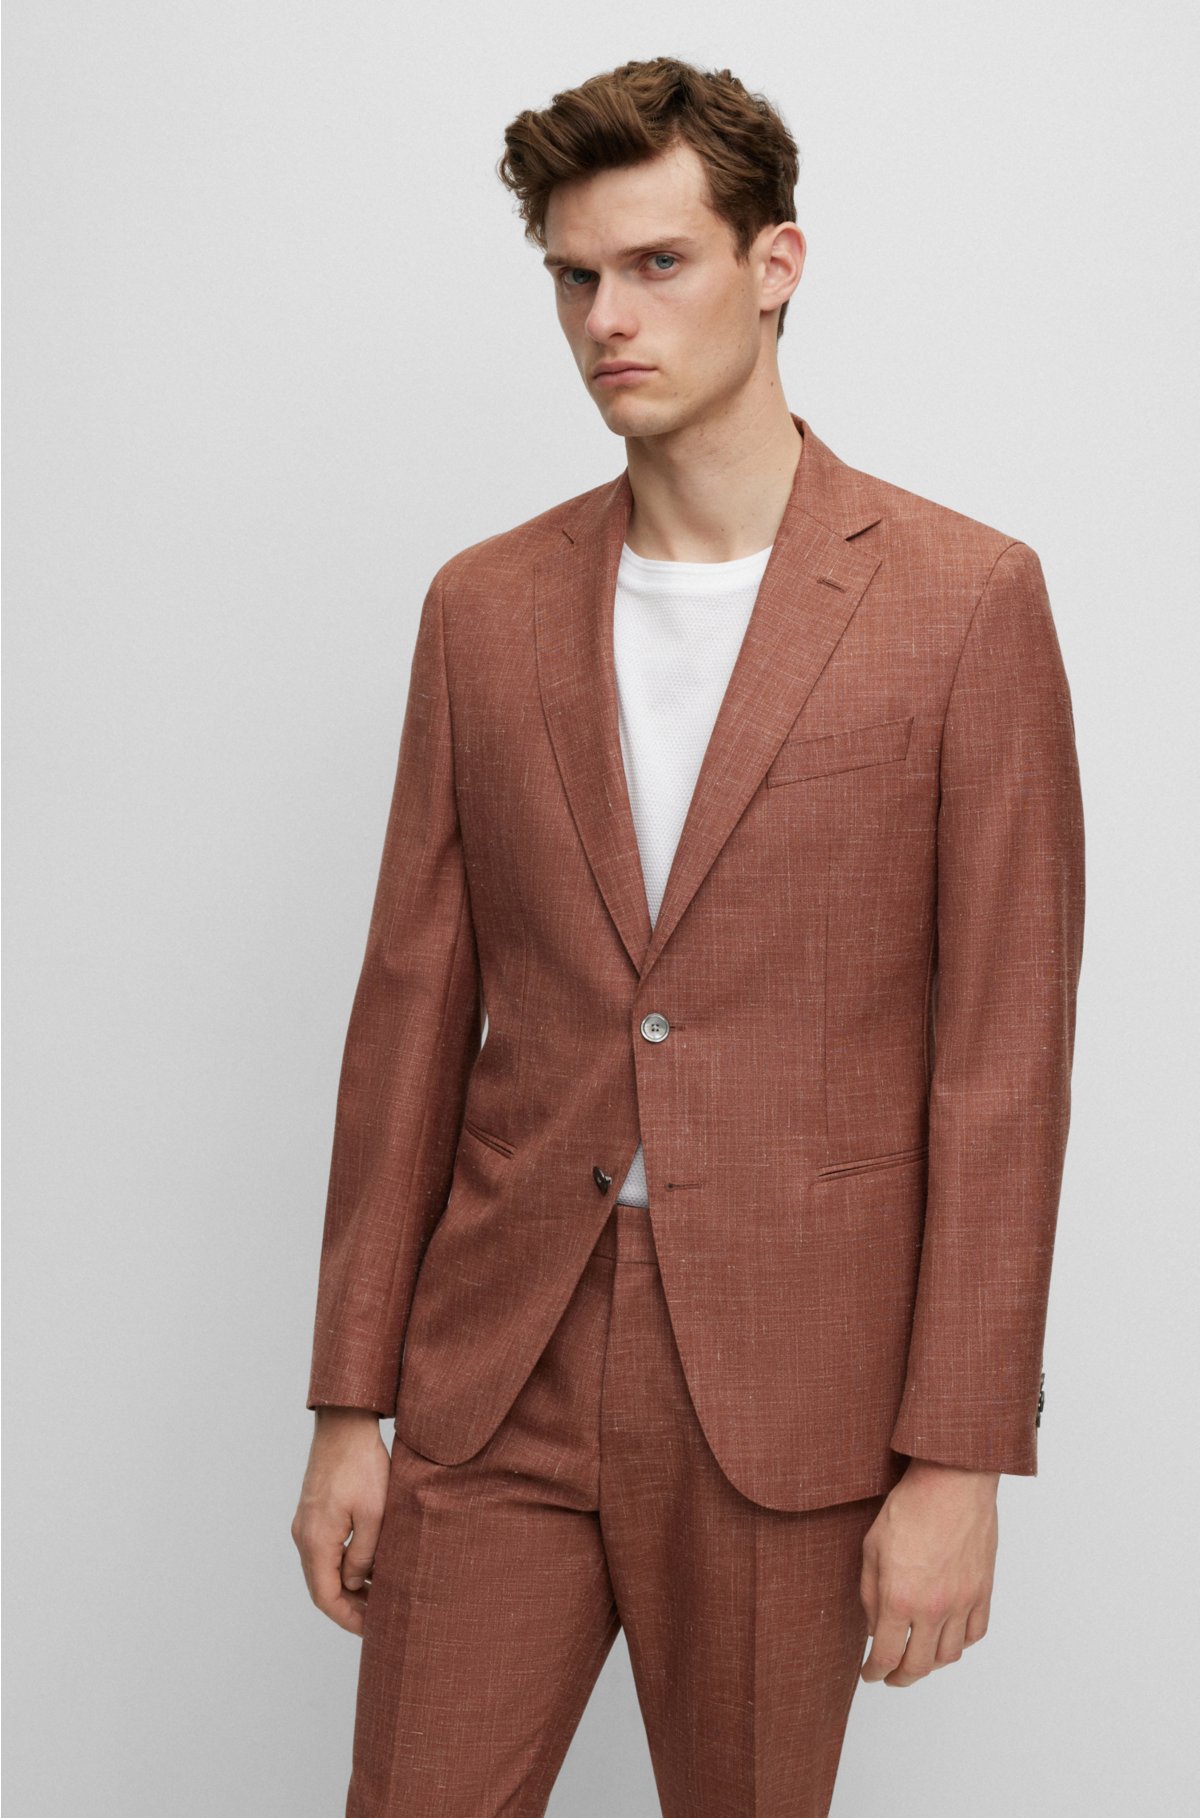 Slim-fit suit in wool, Tussah silk and linen, Red